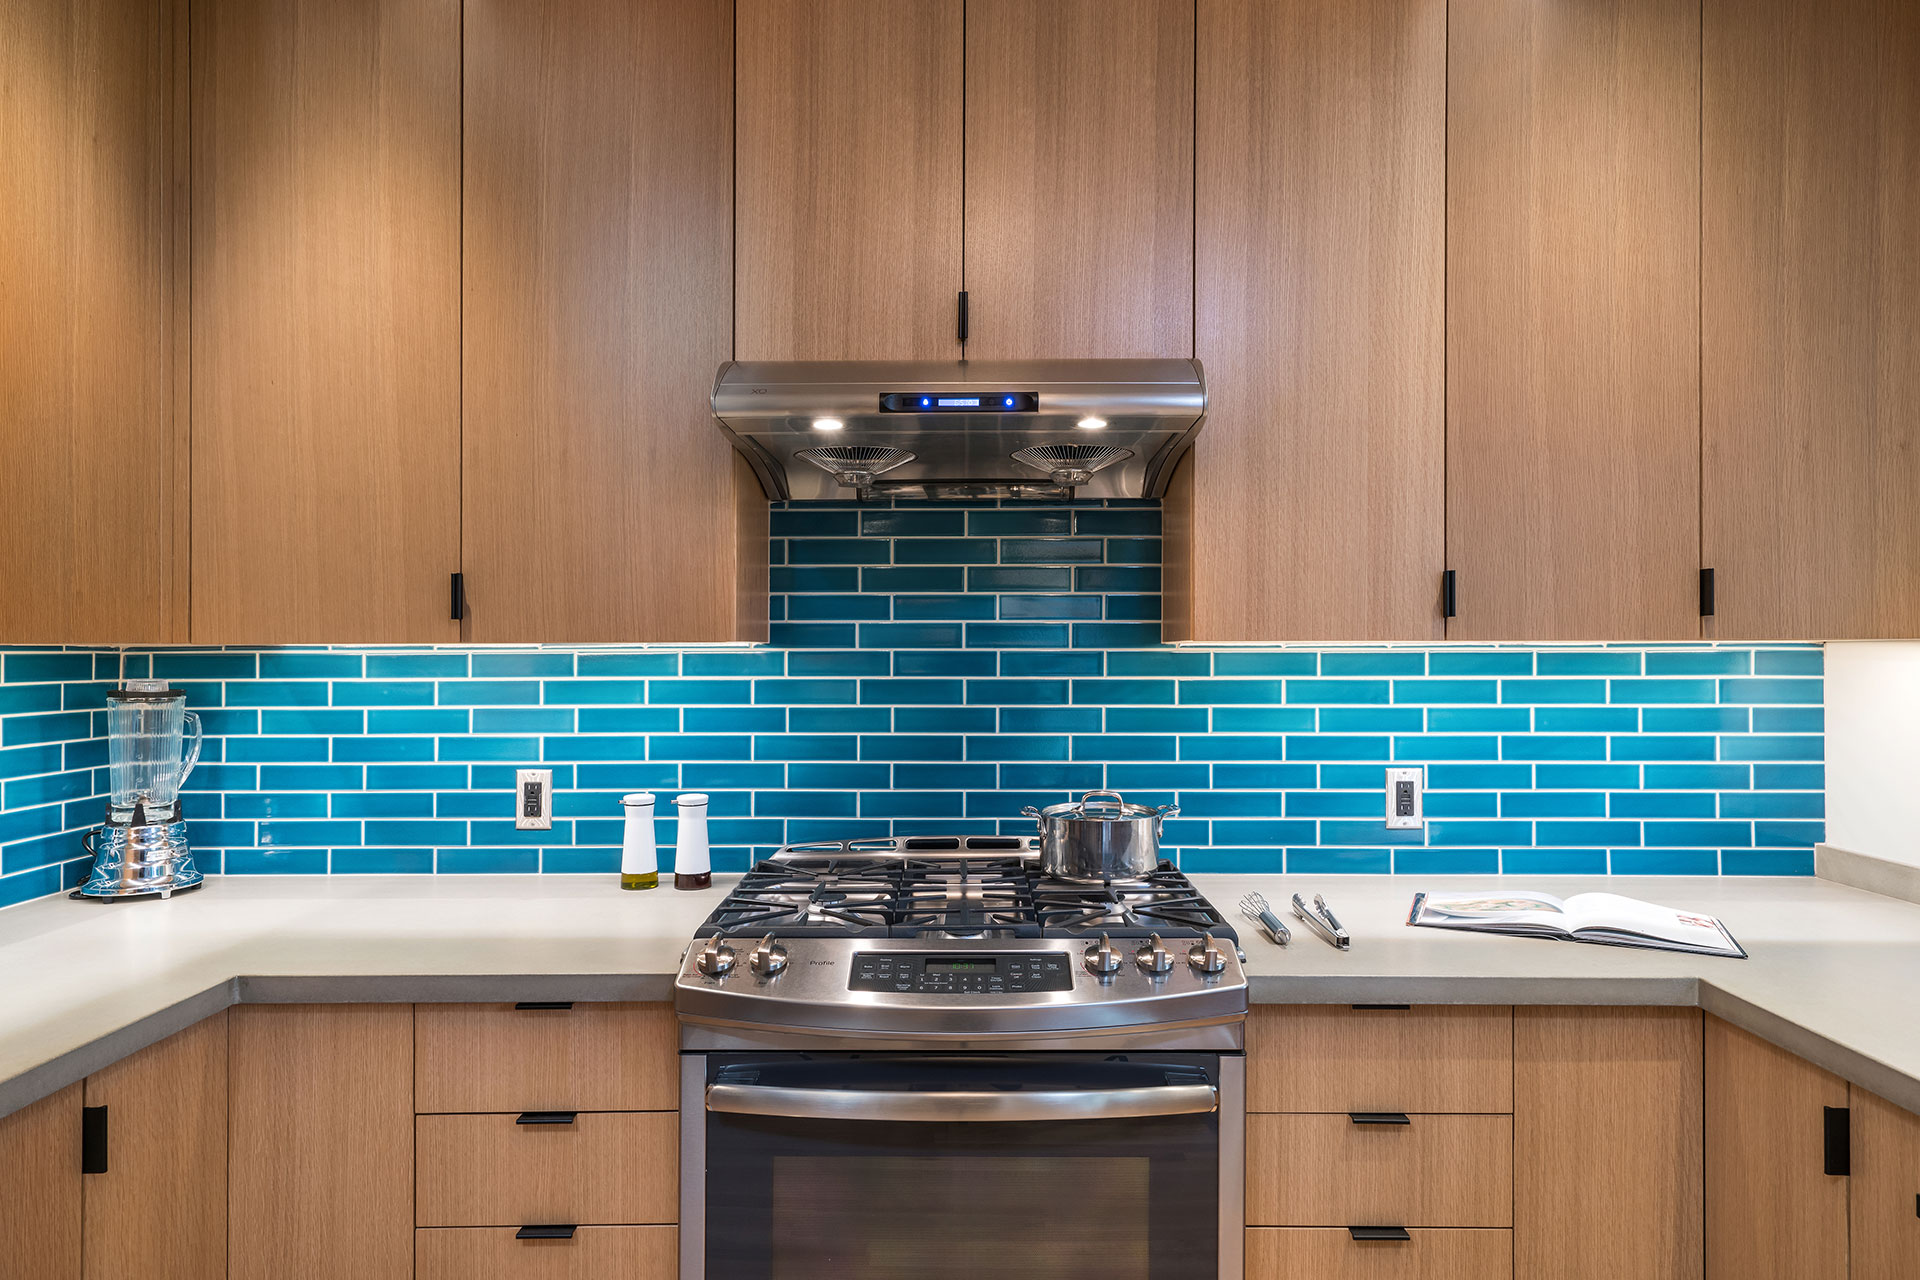 The focal point of the kitchen at the Little Prescott House is the bright blue backsplash with 2" x 8" tile from Fireclay Tile.